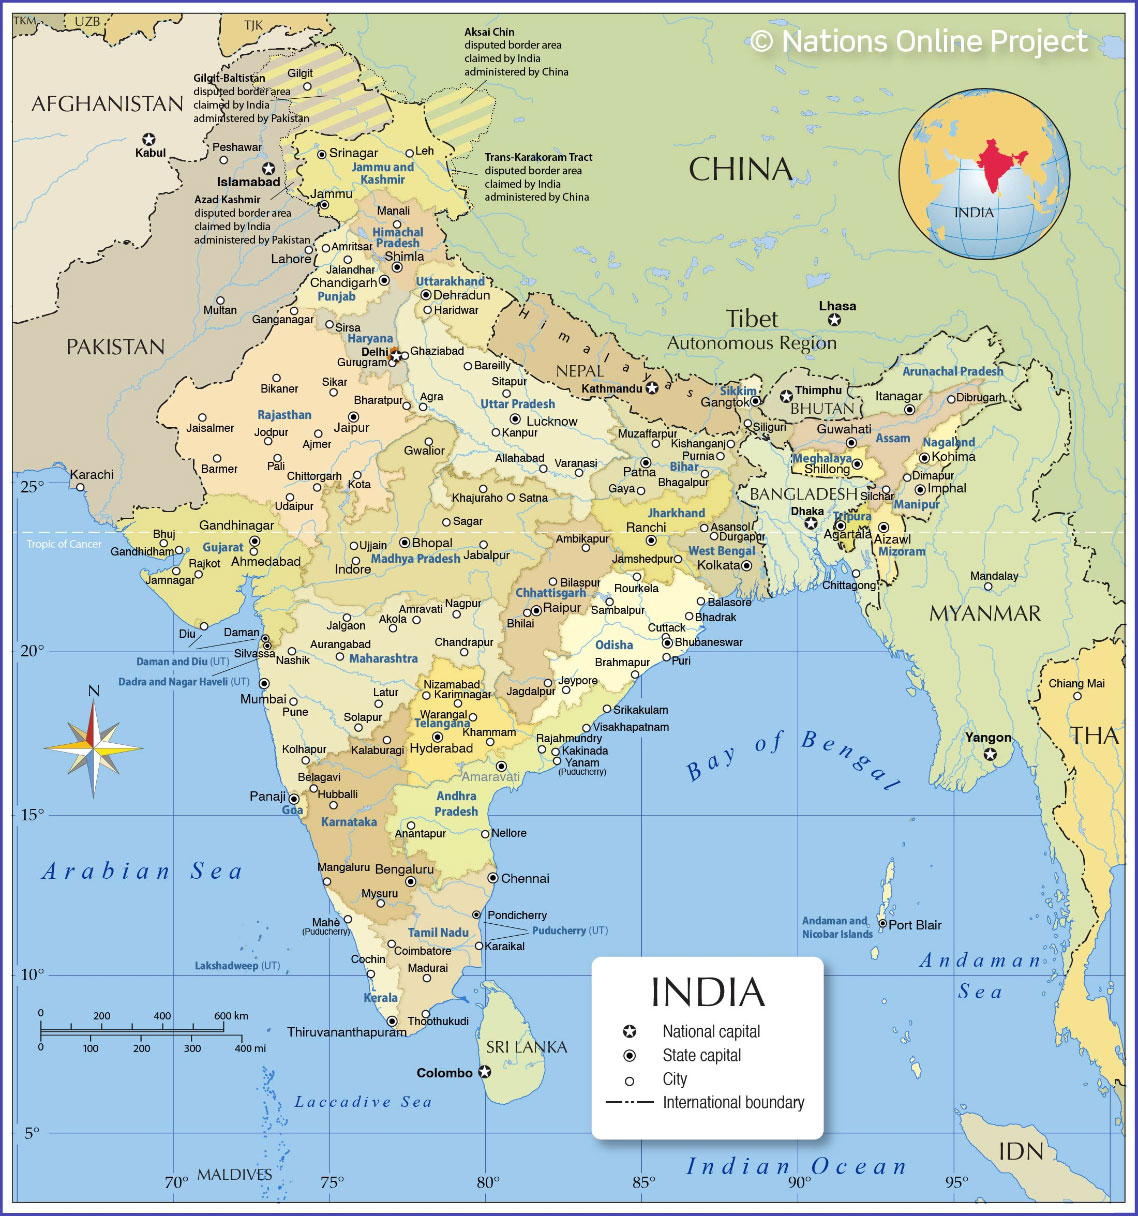 South East States Of India Map India Map Of India's States And Union Territories - Nations Online Project